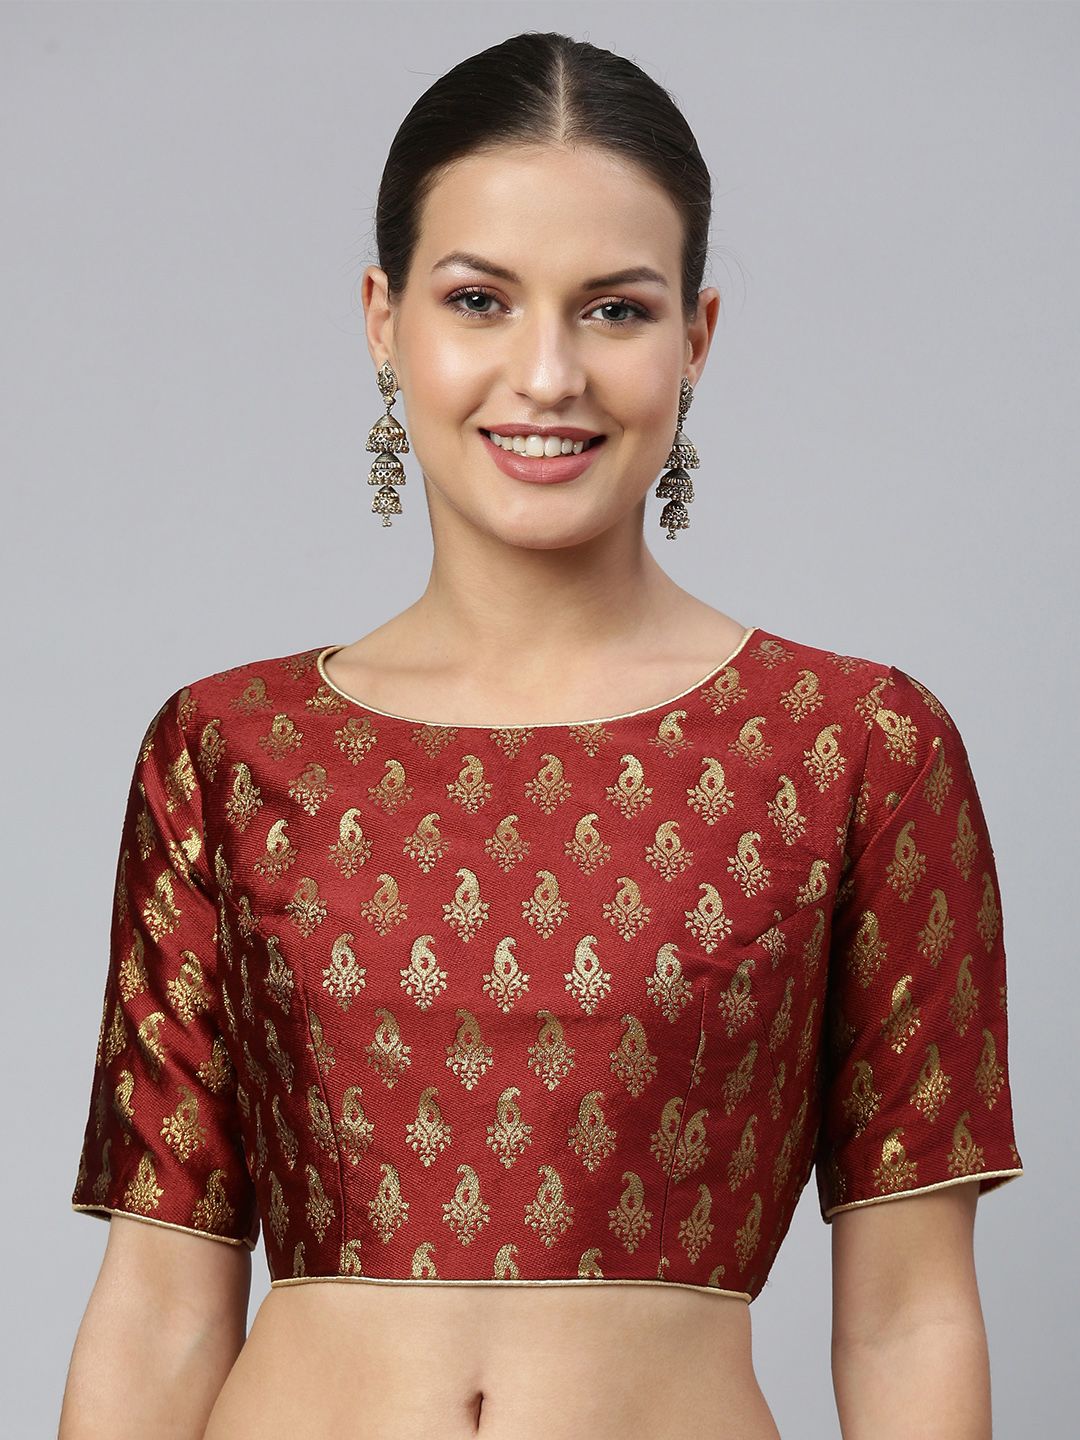 flaher Women Maroon & Gold Ethnic Motifs Jacquard Woven Design Saree Blouse with Tie-Ups Price in India